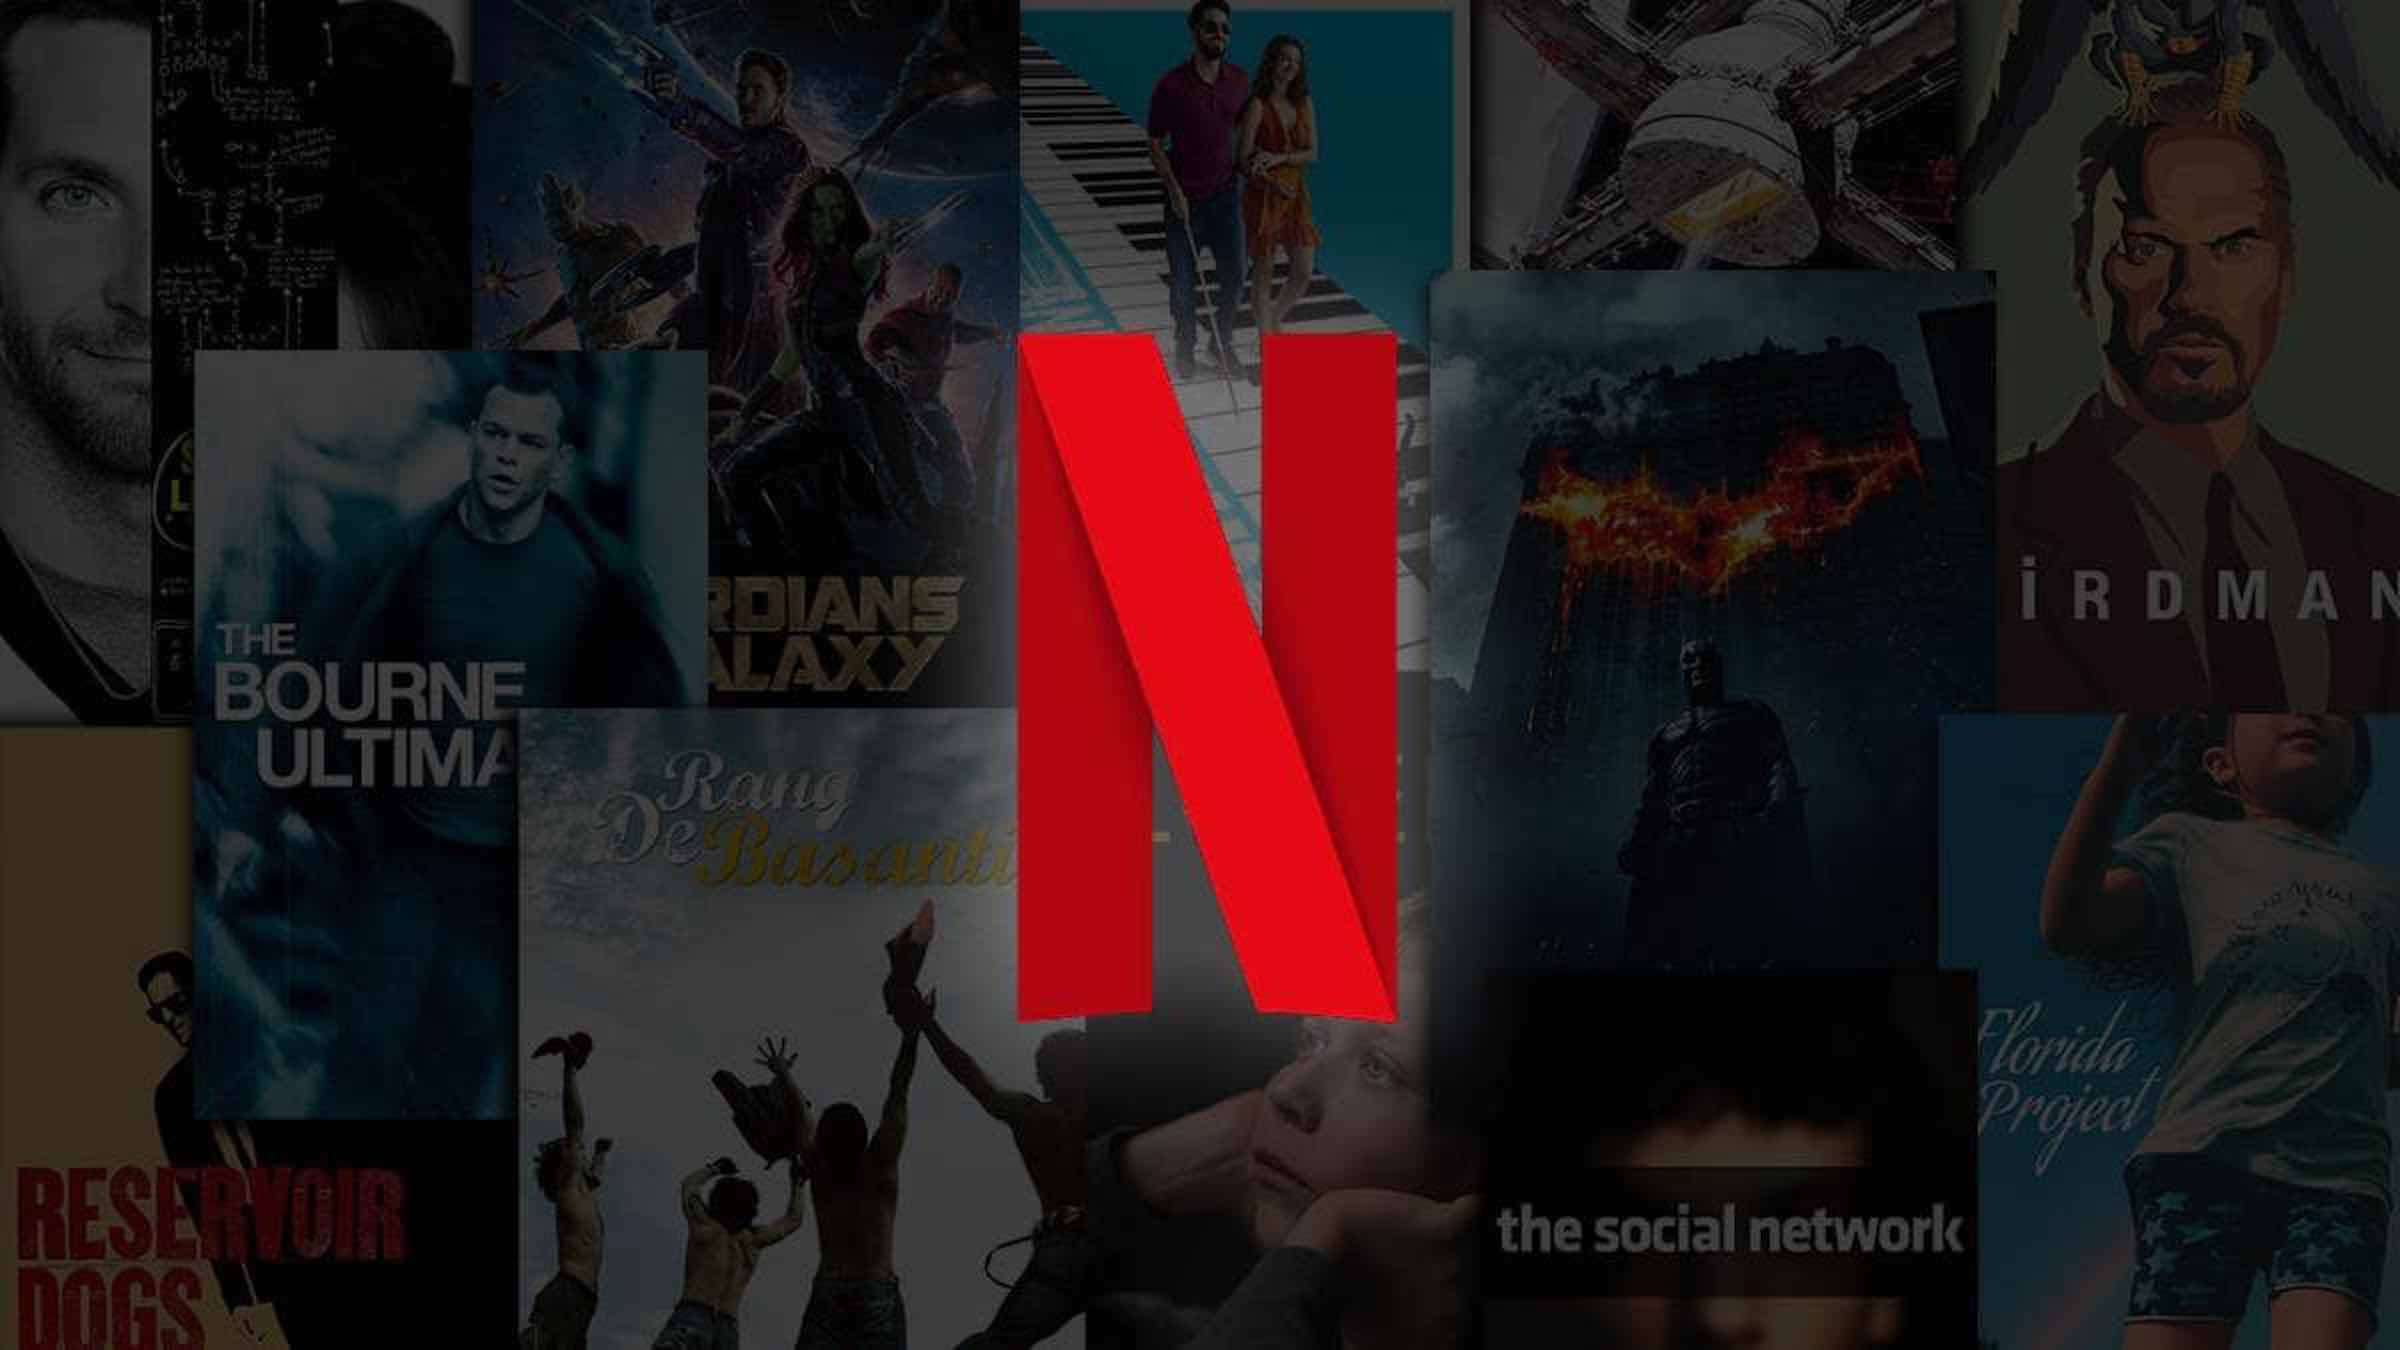 Lucky for you, we have some recommendations to whet your Netflix loving appetite. Here are new series worth checking out on Netflix in 2020.